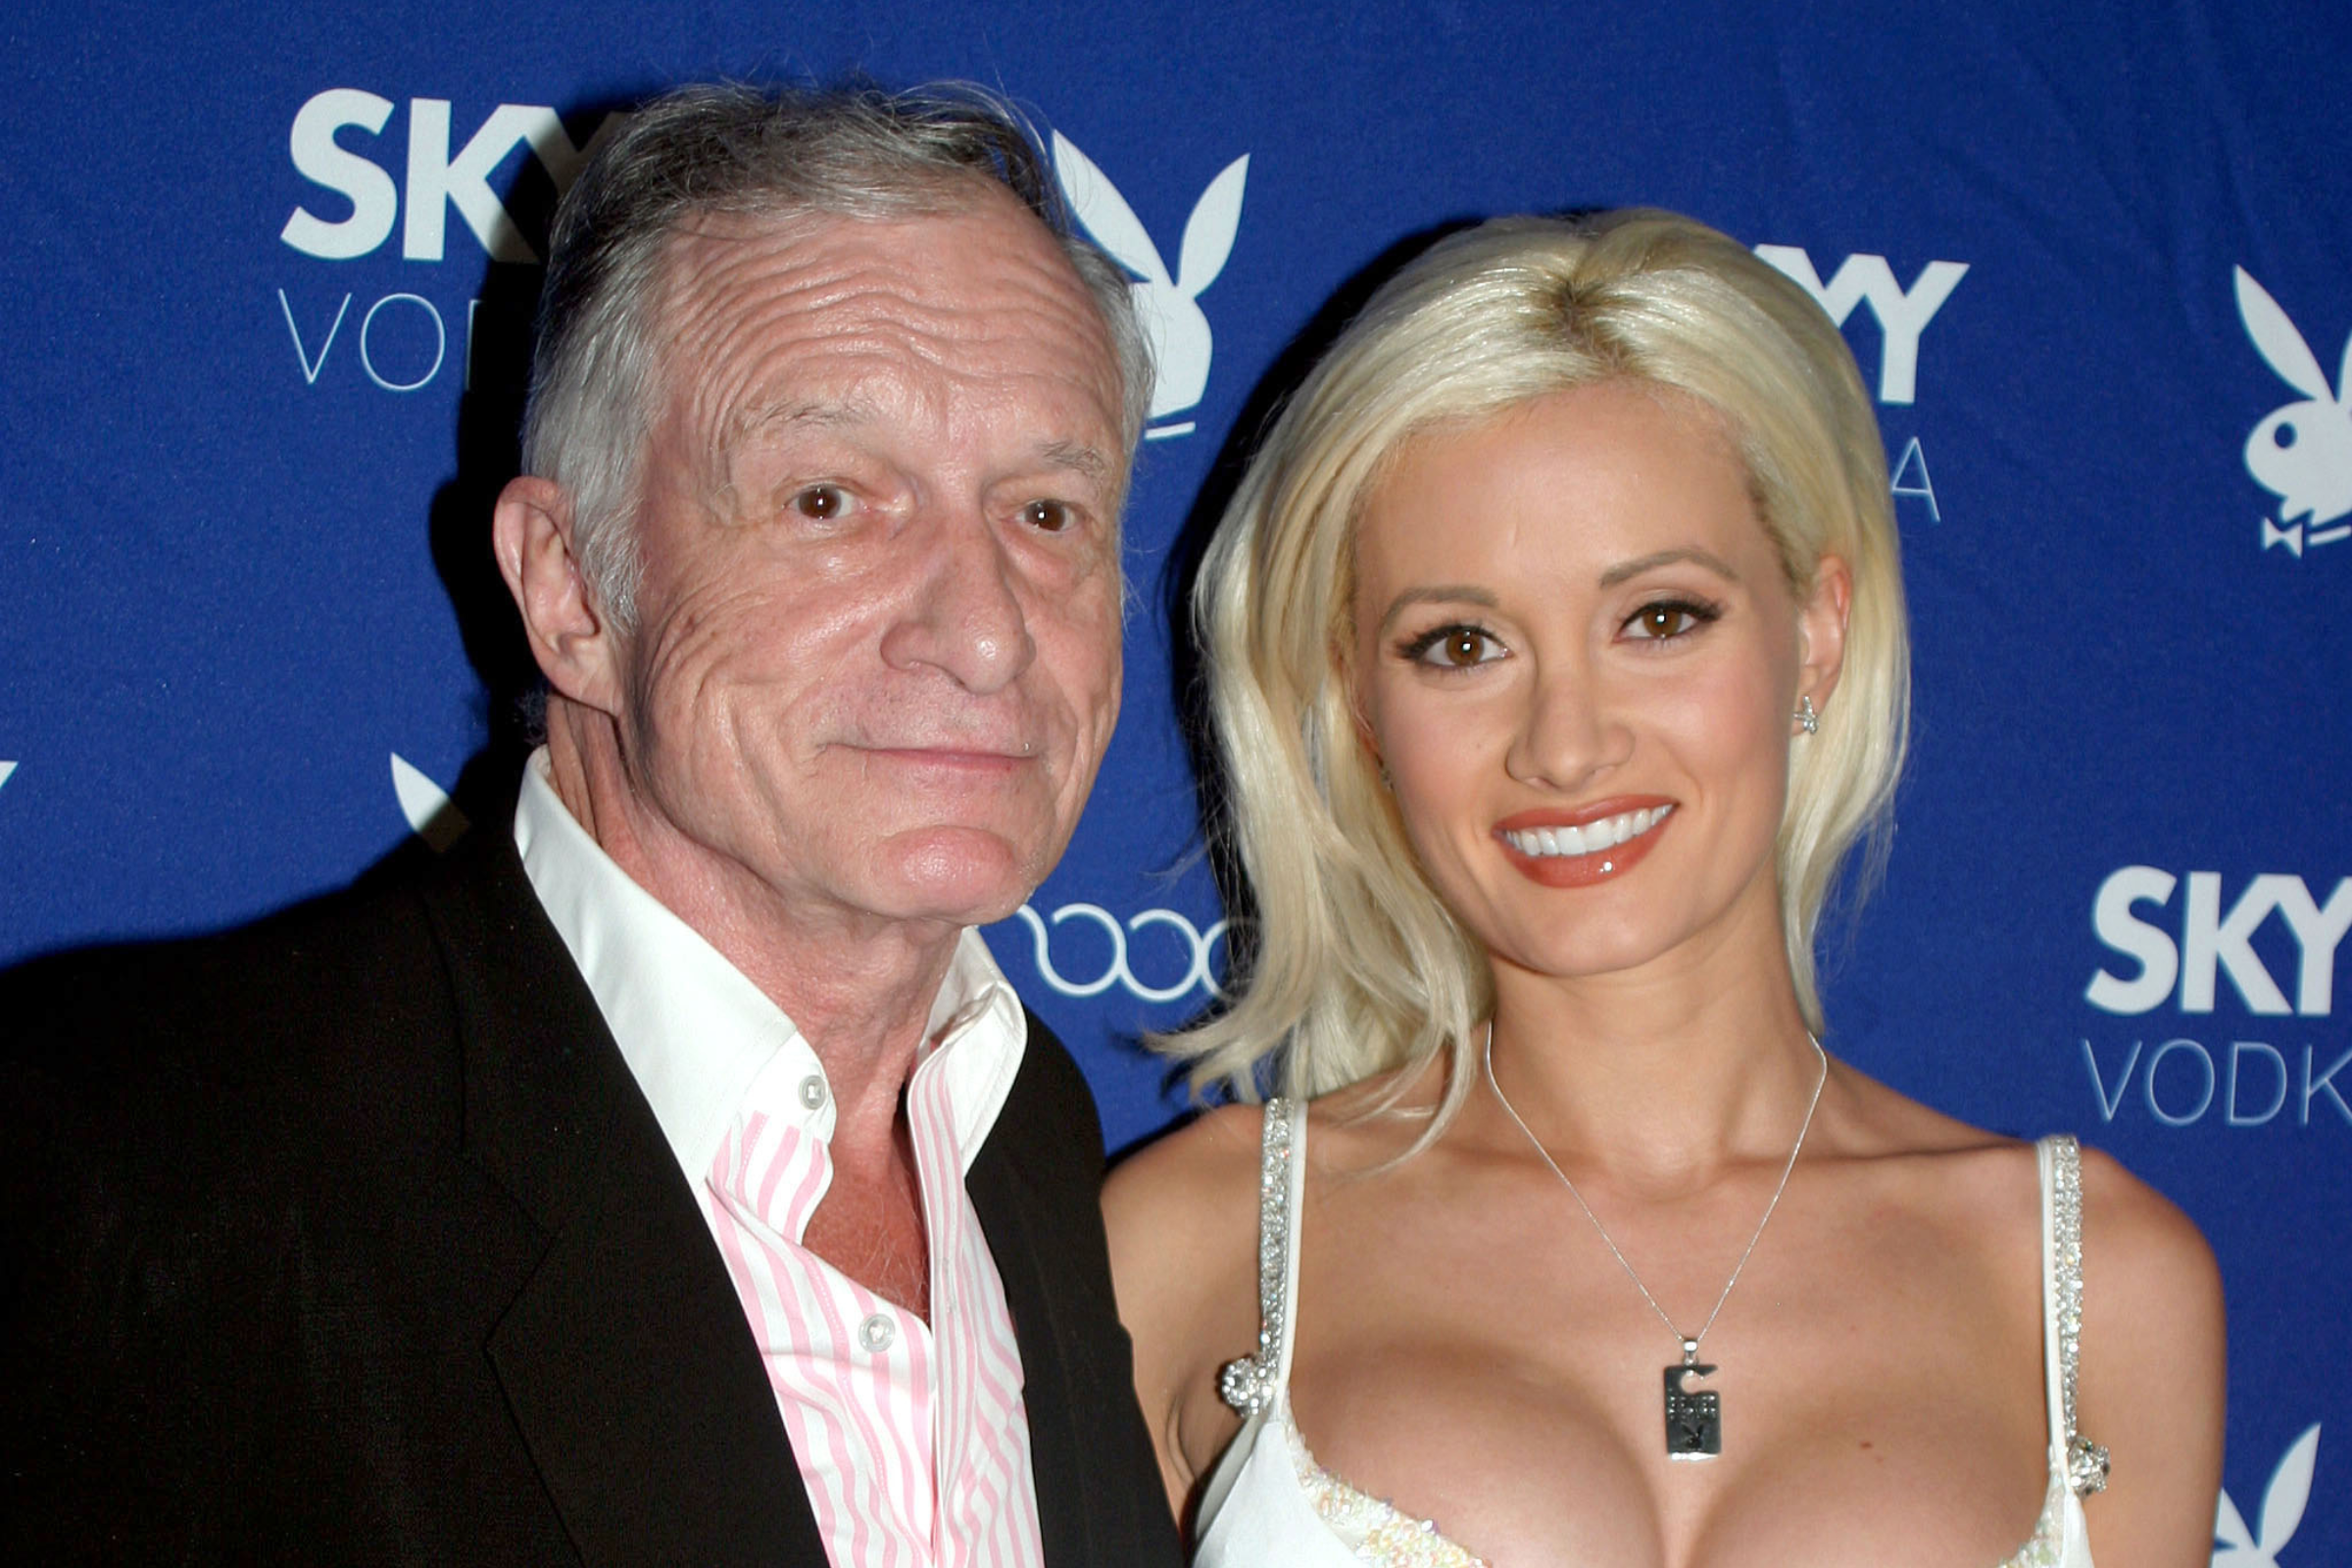 Holly Madison Hef Took Nude Photos of Women When They